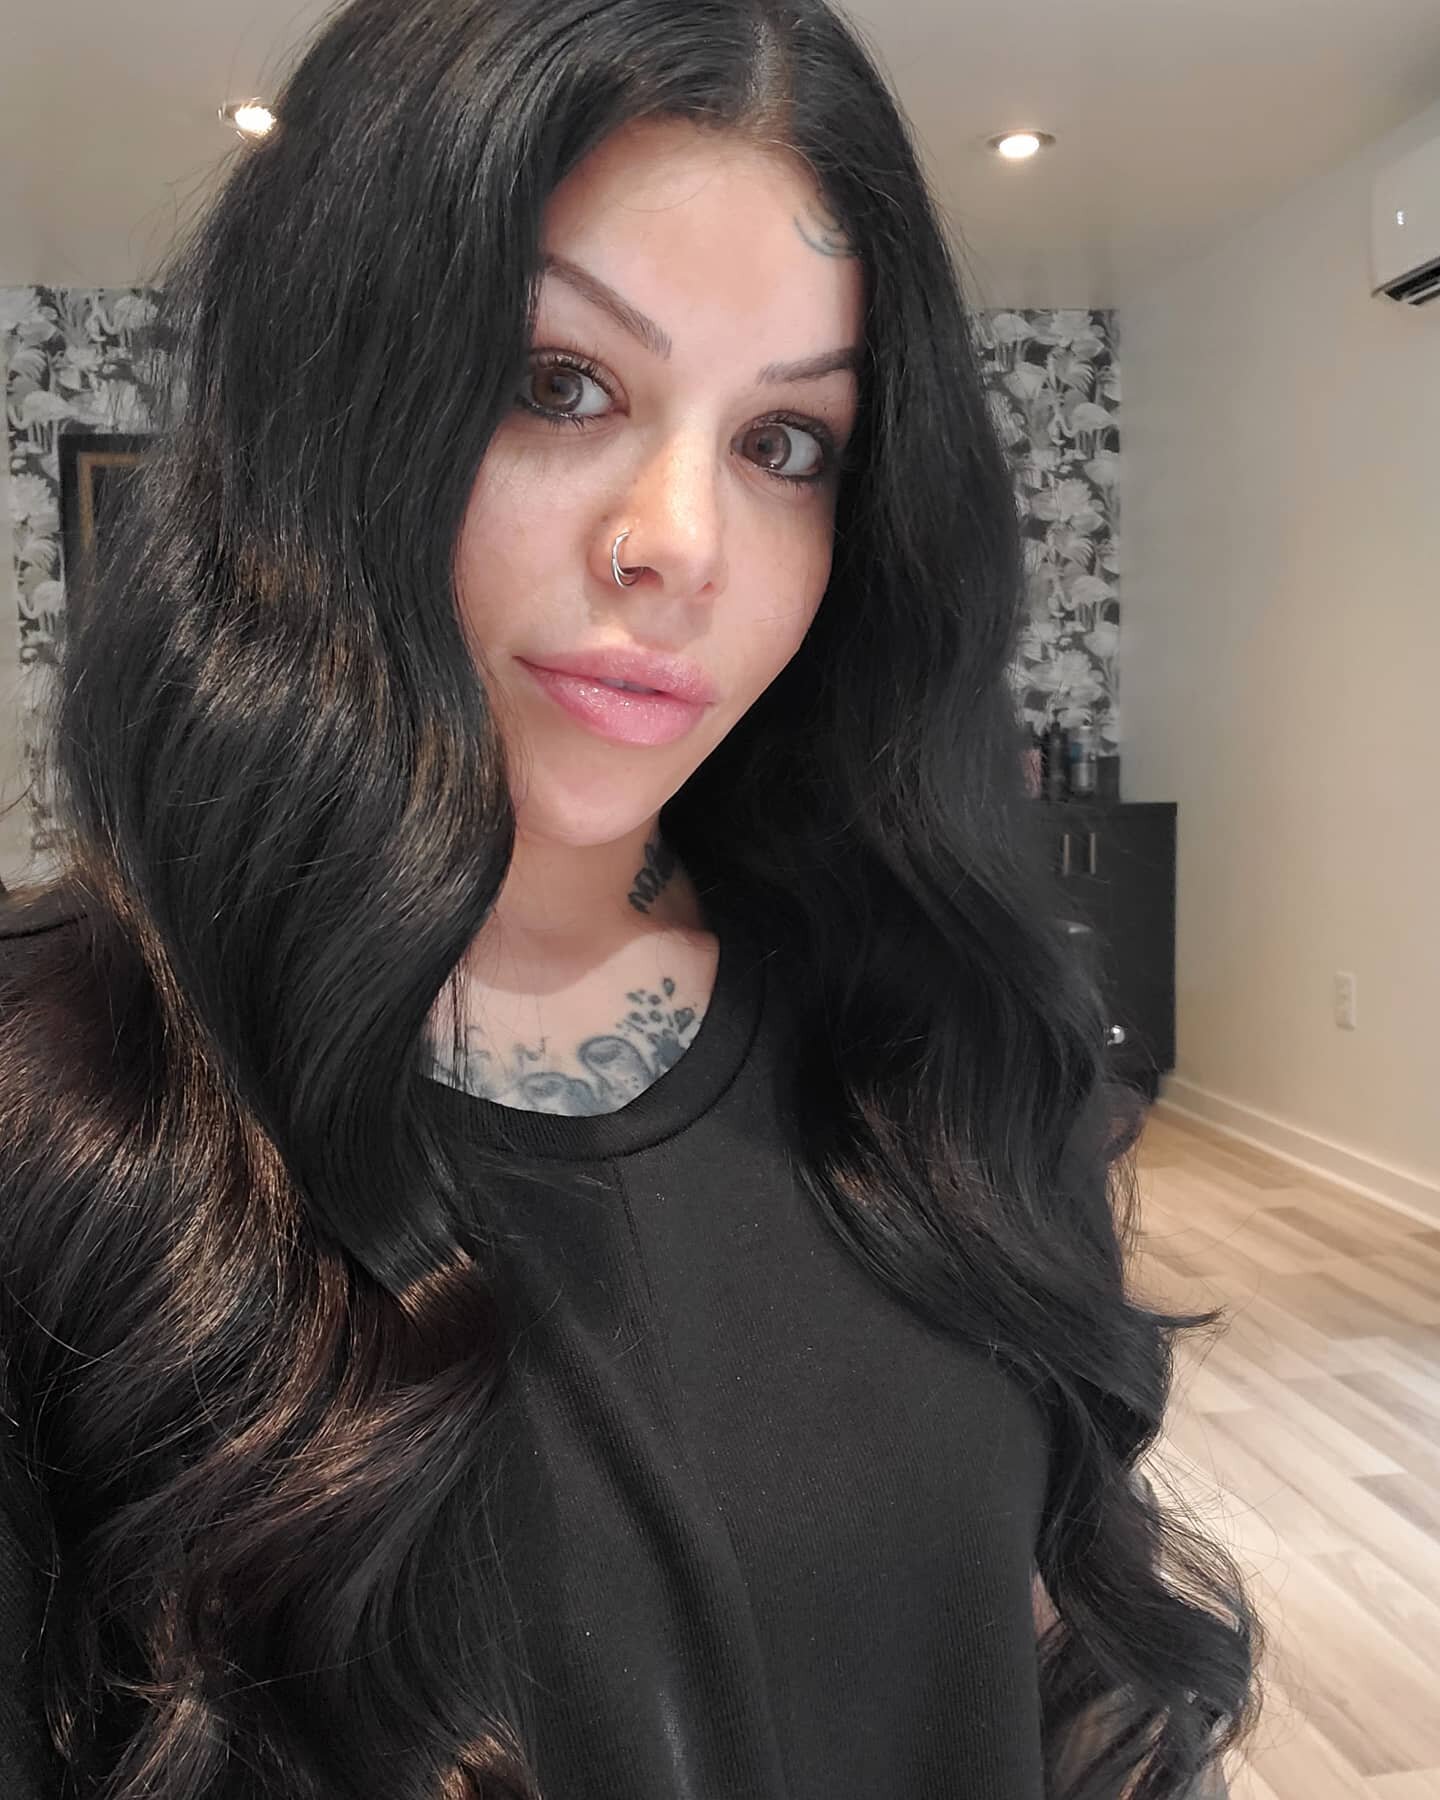 Finishing up my fabulous Friday and I am just so grateful for all of my loyal clients and all of the new people I have met in my salon this week. Thanks all of you for sticking by me through the move- I couldn't be more happy to have you here with me